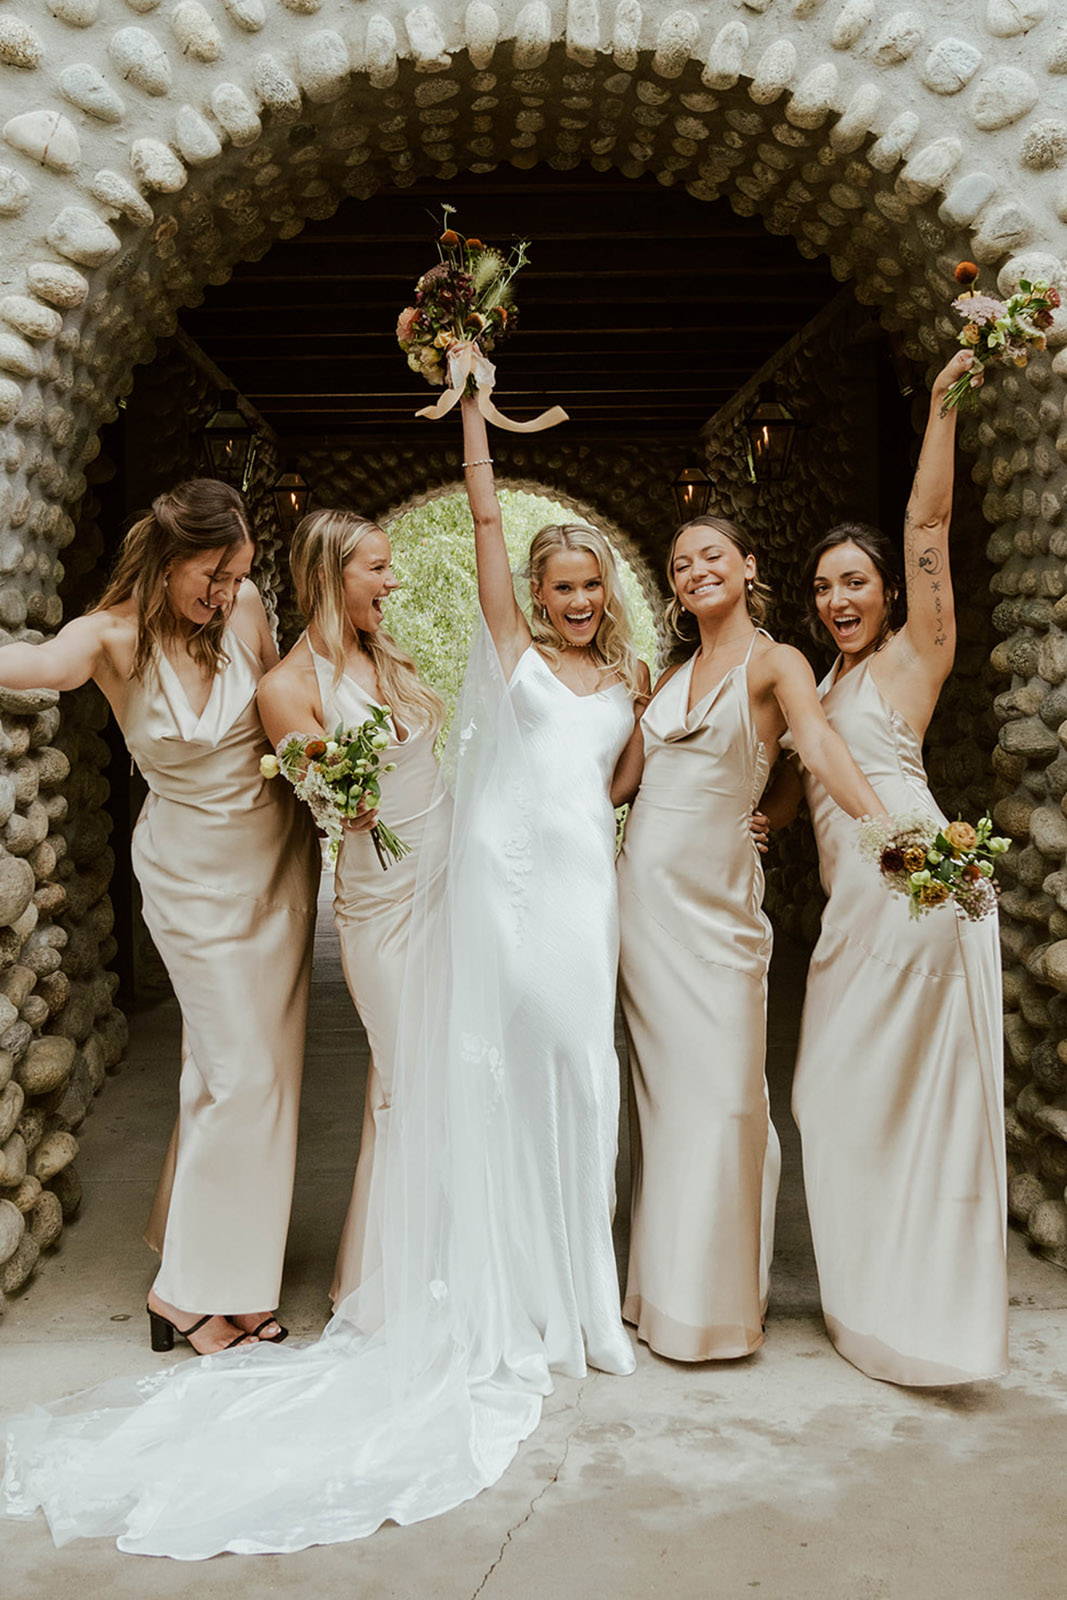 Bride and her bridesmaids wearing champagne coloured dresses.